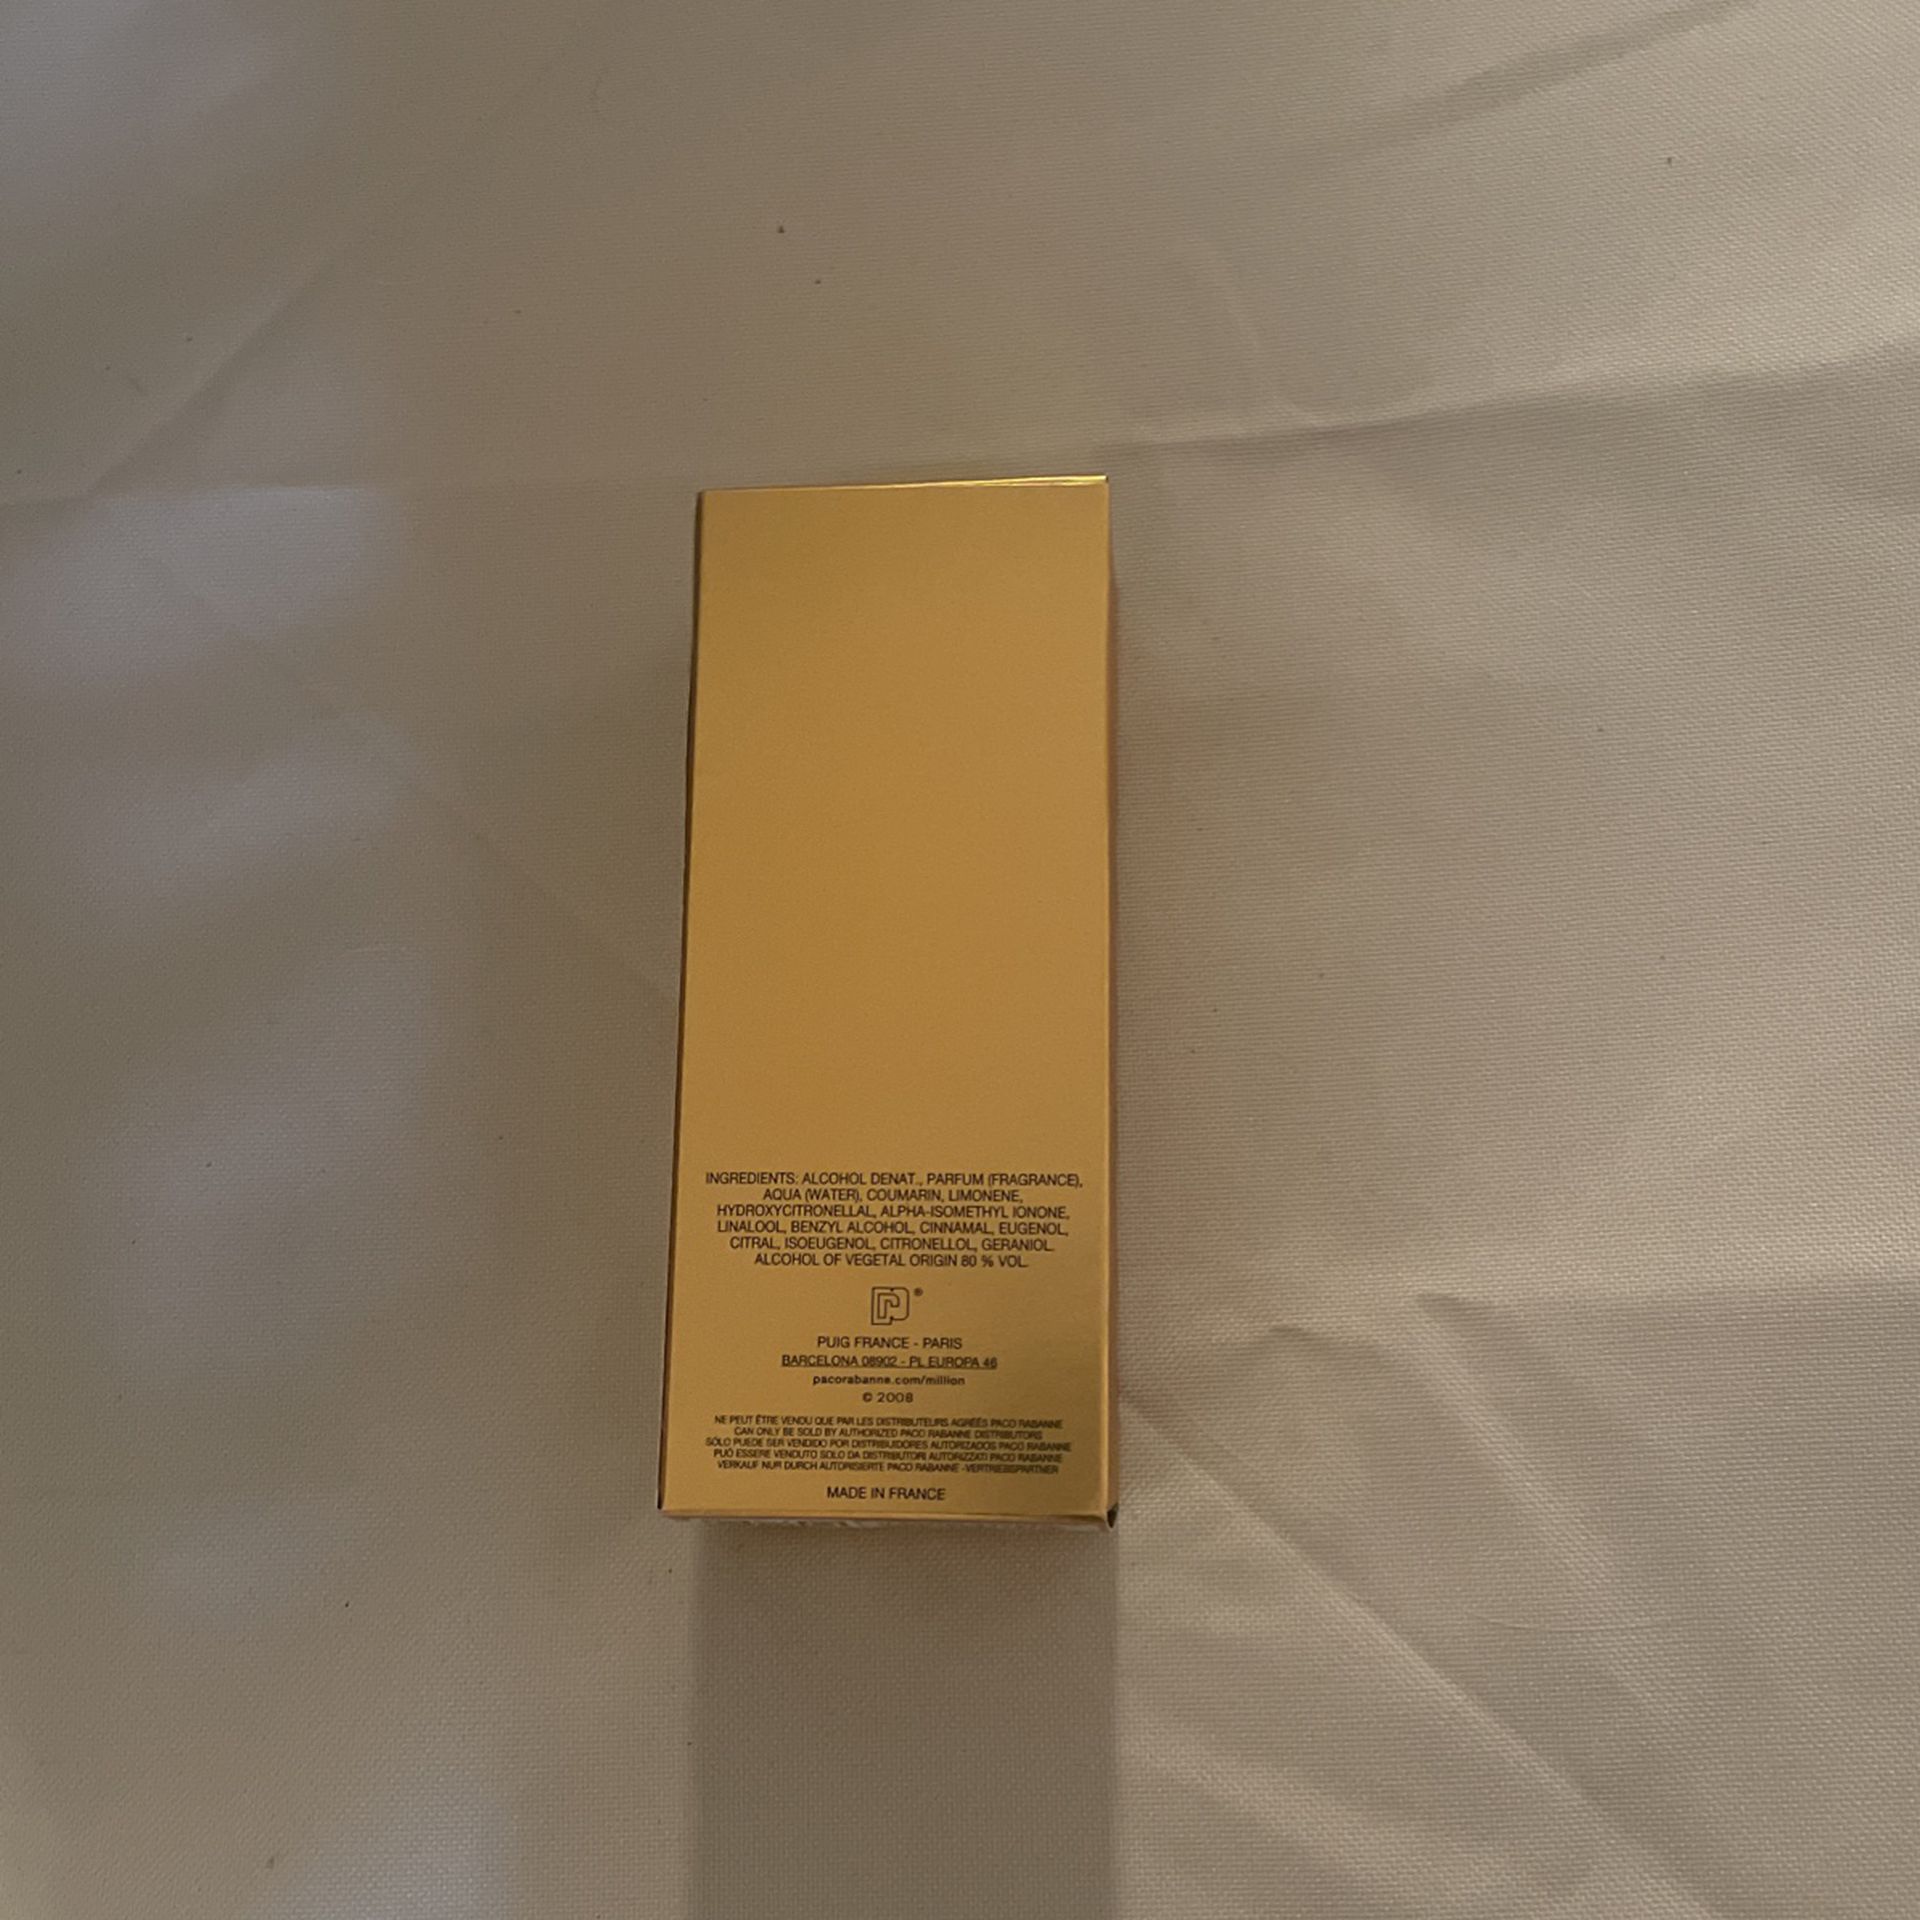 1 Million by Paco Rabanne Cologne